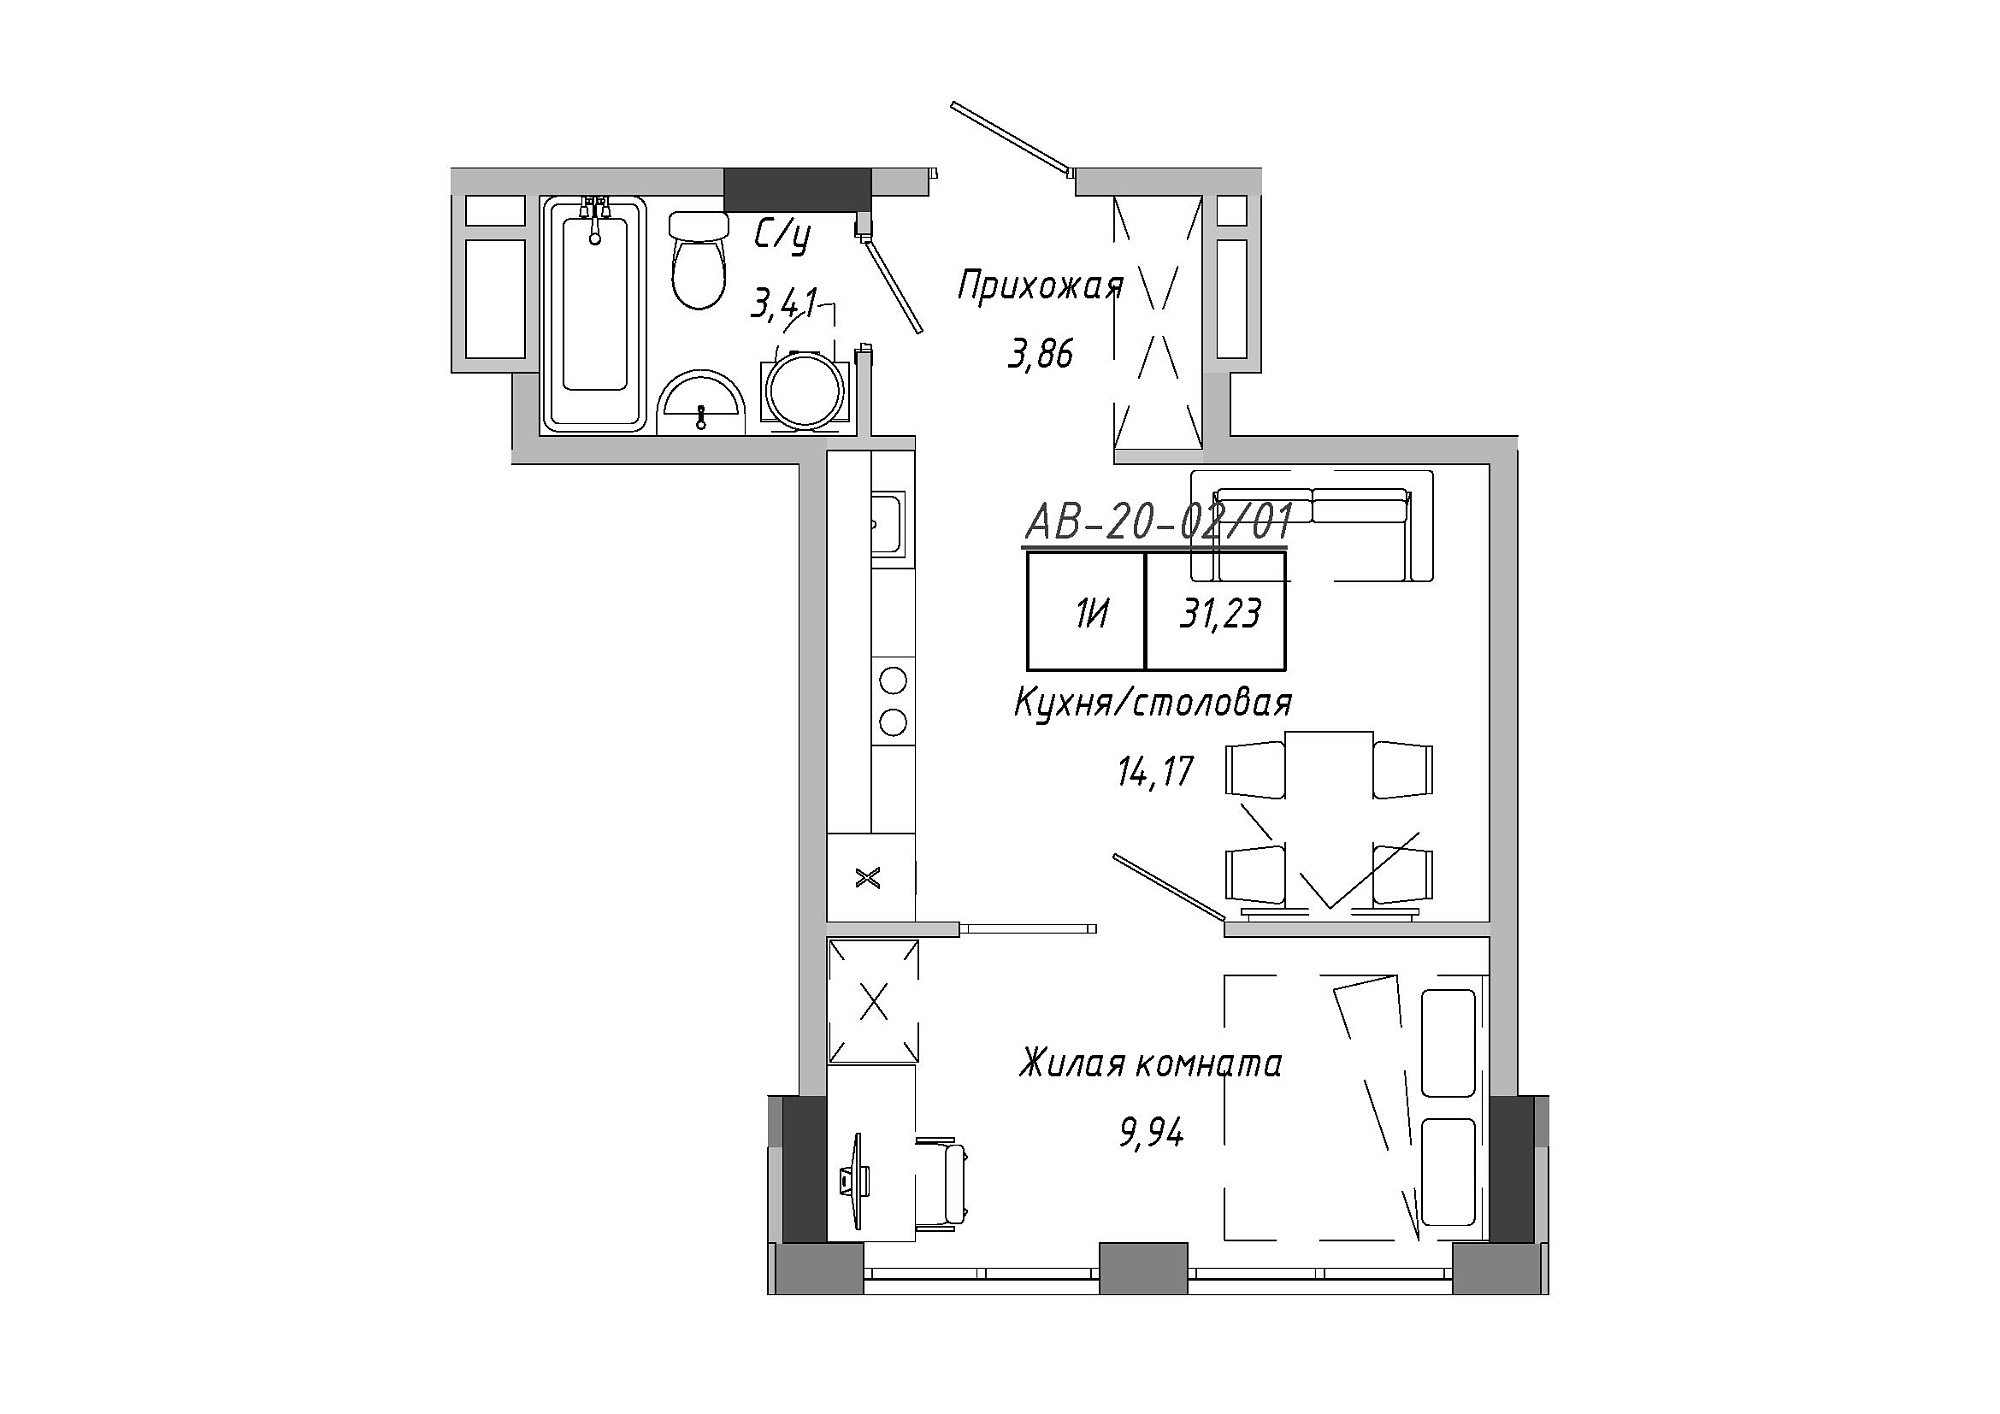 Planning 1-rm flats area 31.23m2, AB-20-02/00001.